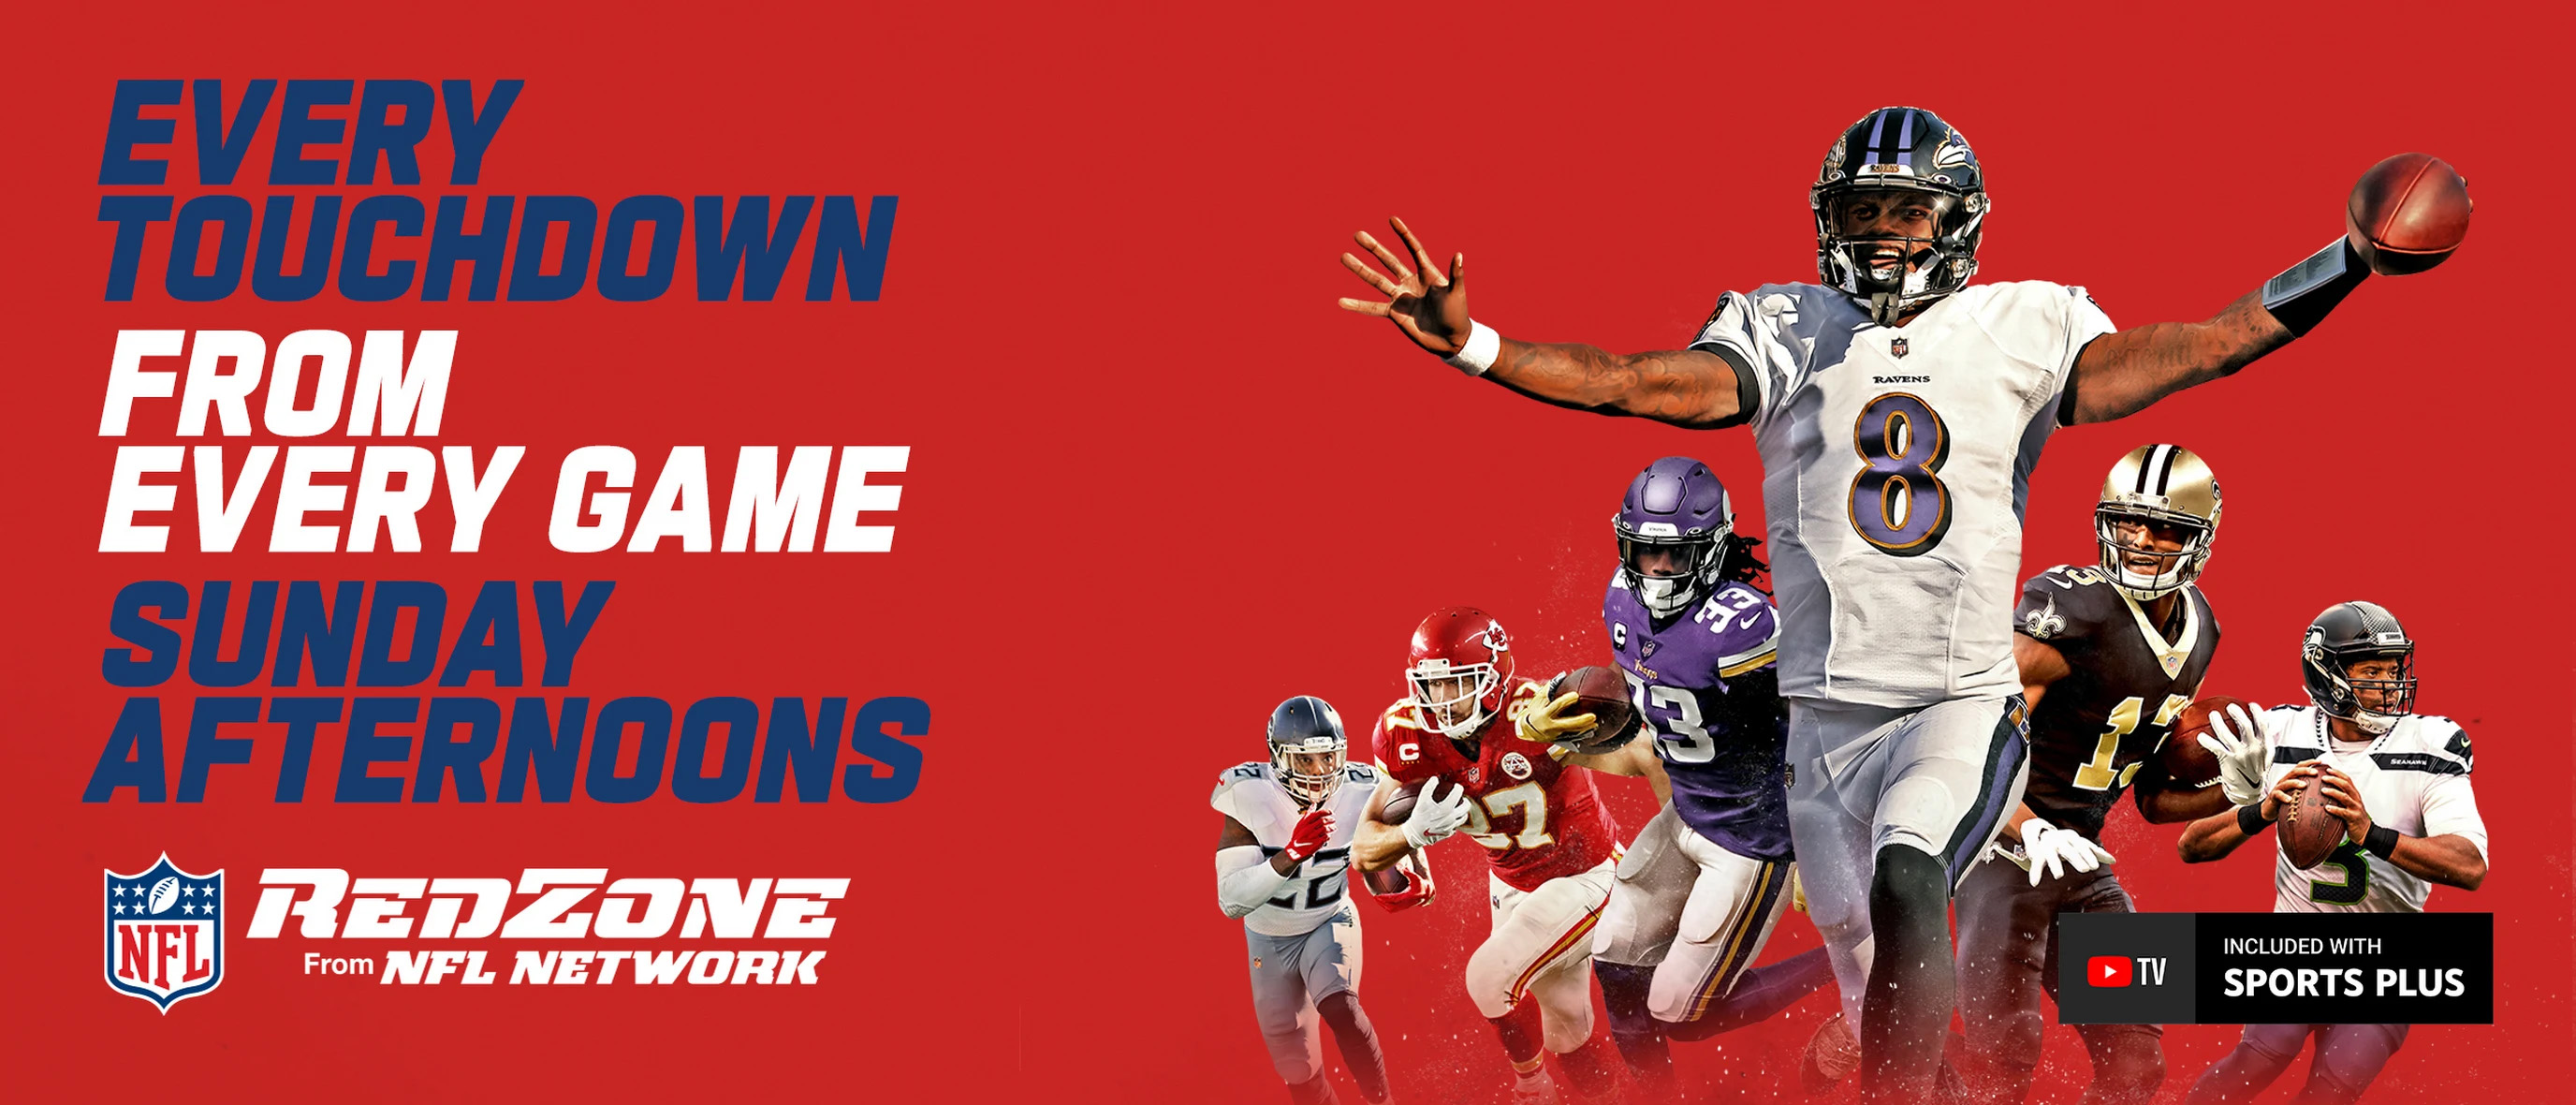 YouTube TV giving subscribers a free preview of NFL RedZone this weekend What to Watch